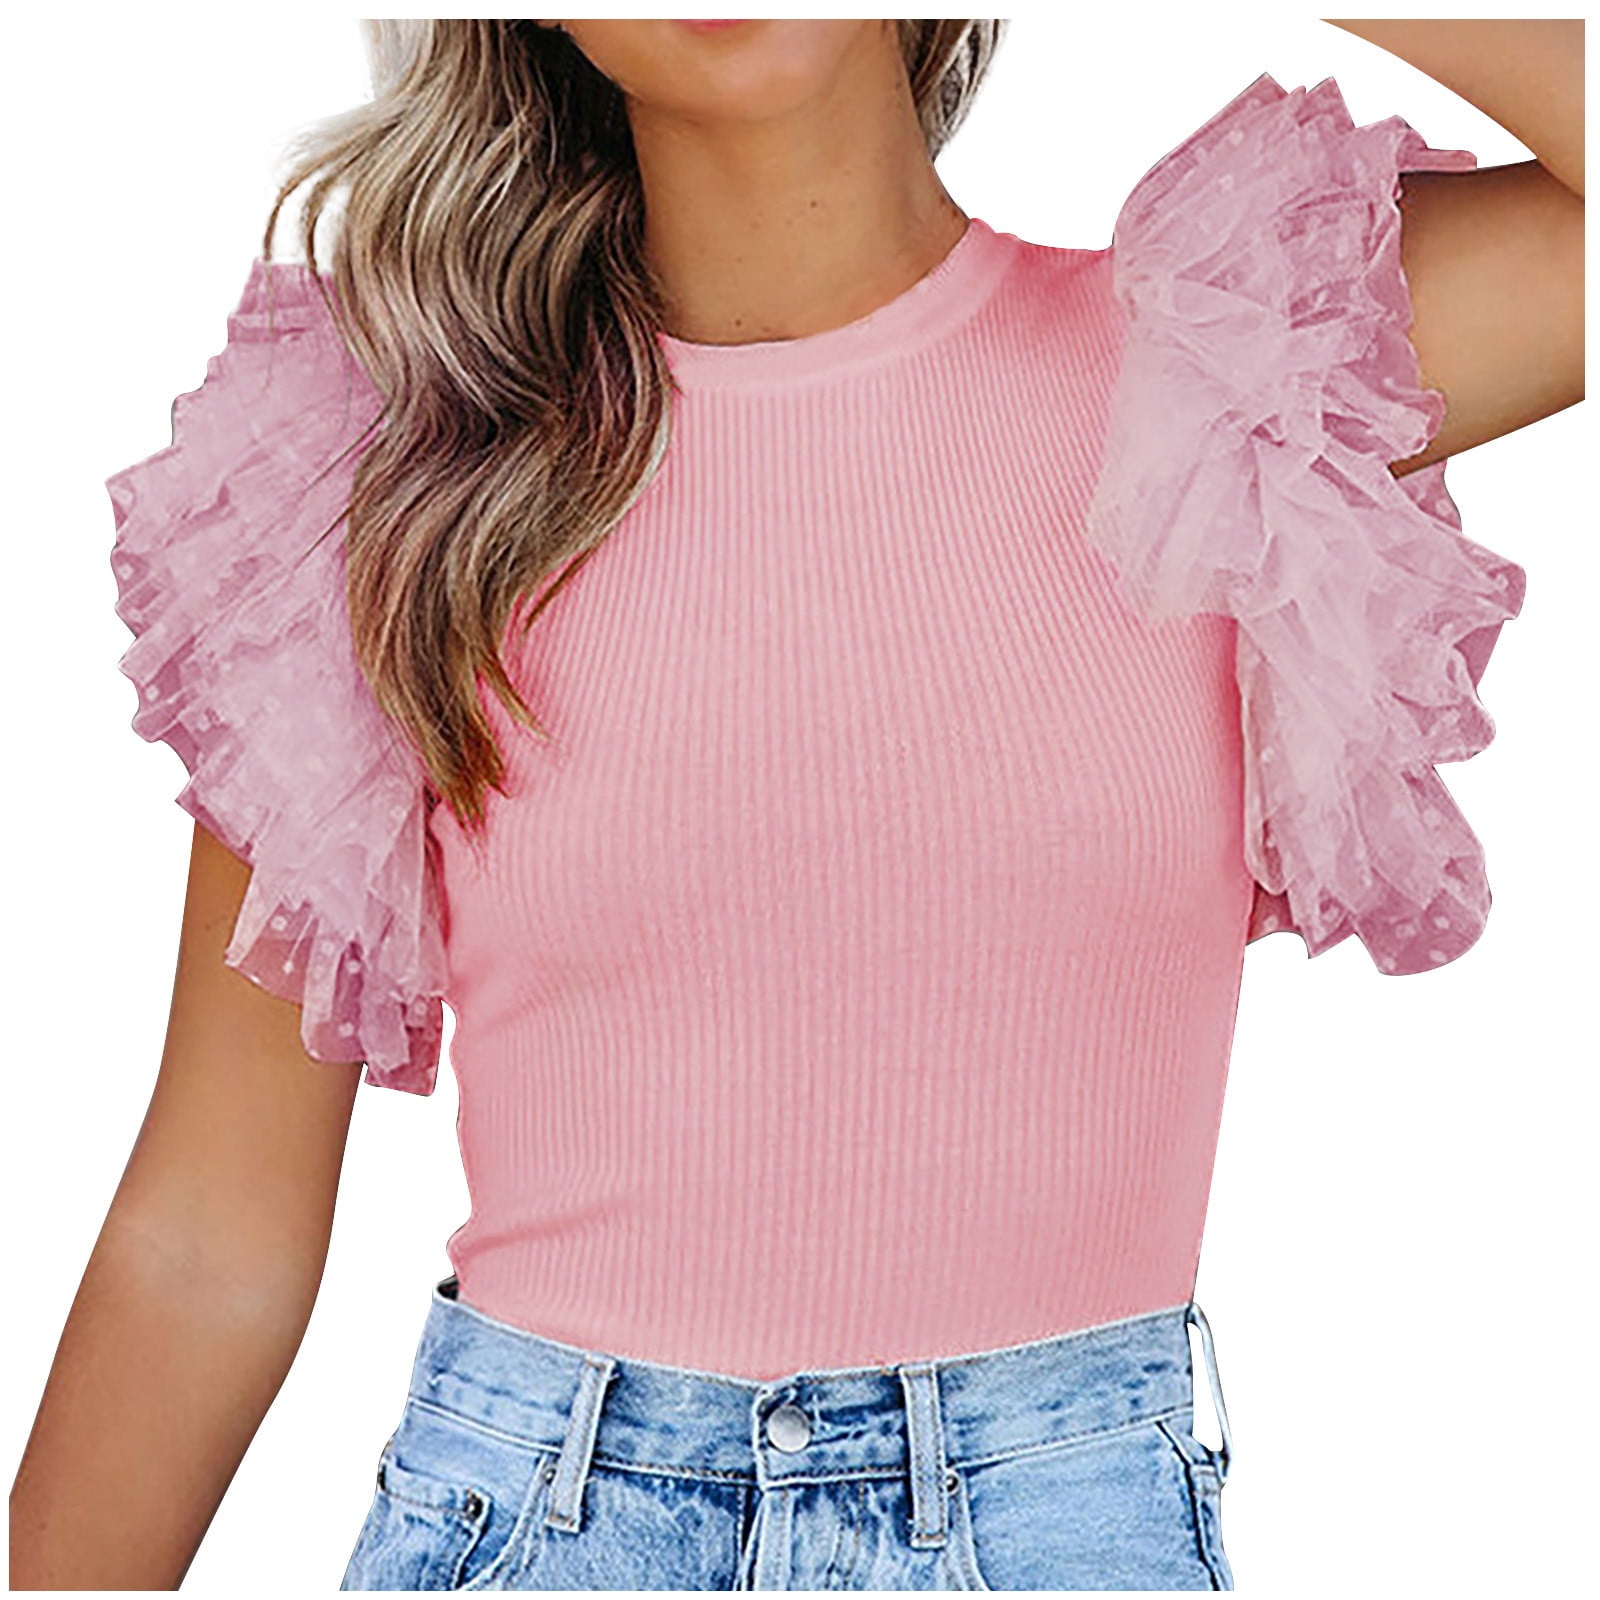 YYDGH Women's Layered Ruffle Mesh Fly Sleeve Tops Round Neck Solid Color  Ribbed Slim Fit Blouse Tee Pink S